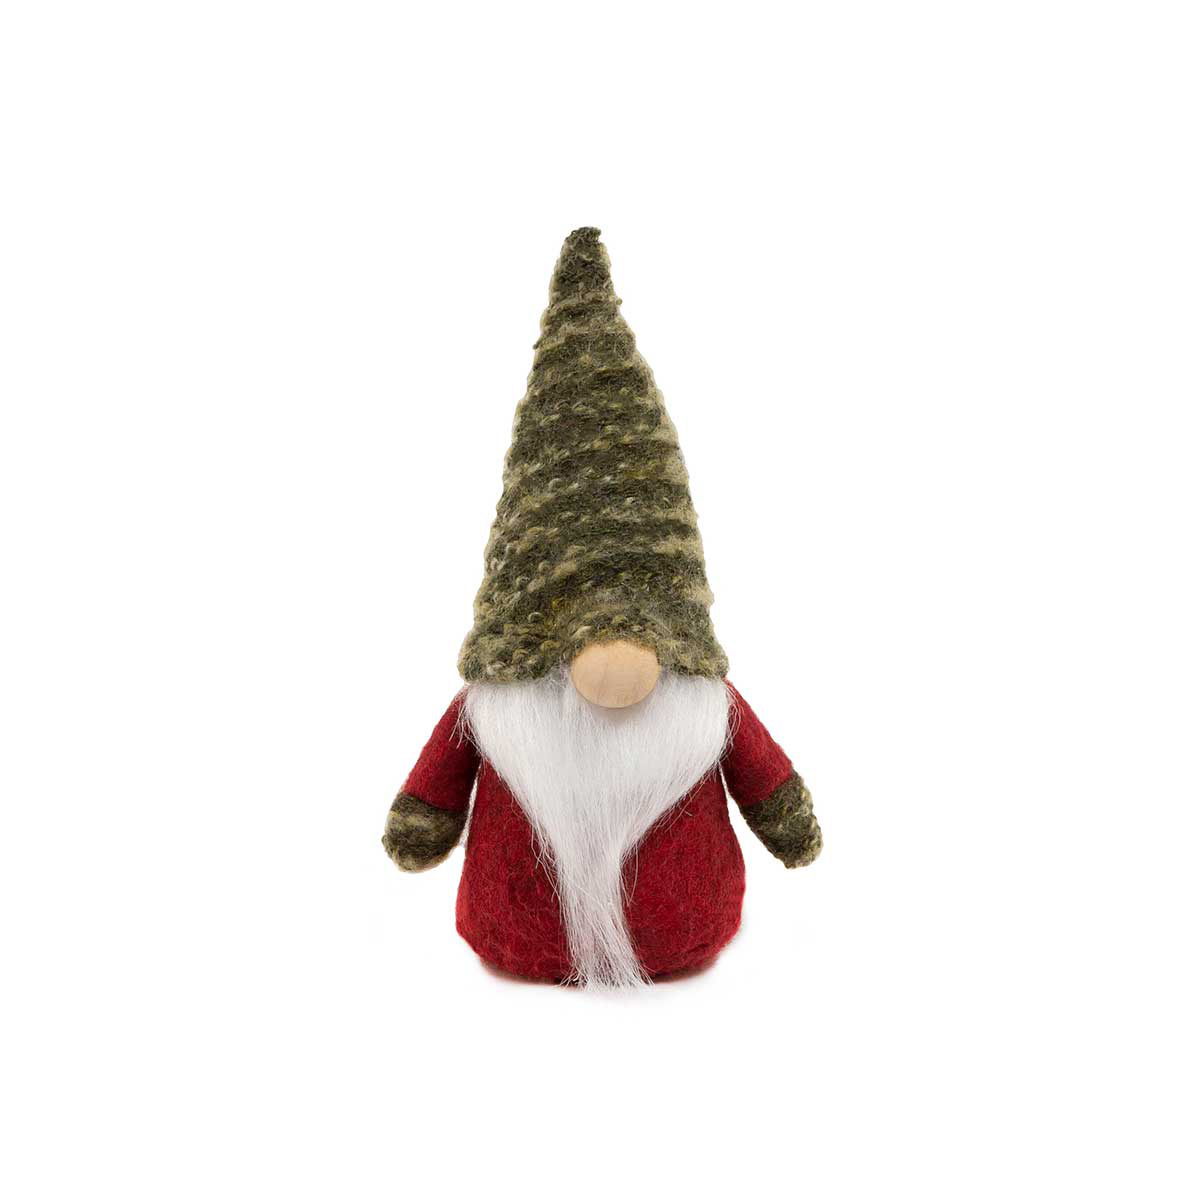 FRANZ GNOME BURGUNDY WITH SWEATER HAT 5.5"